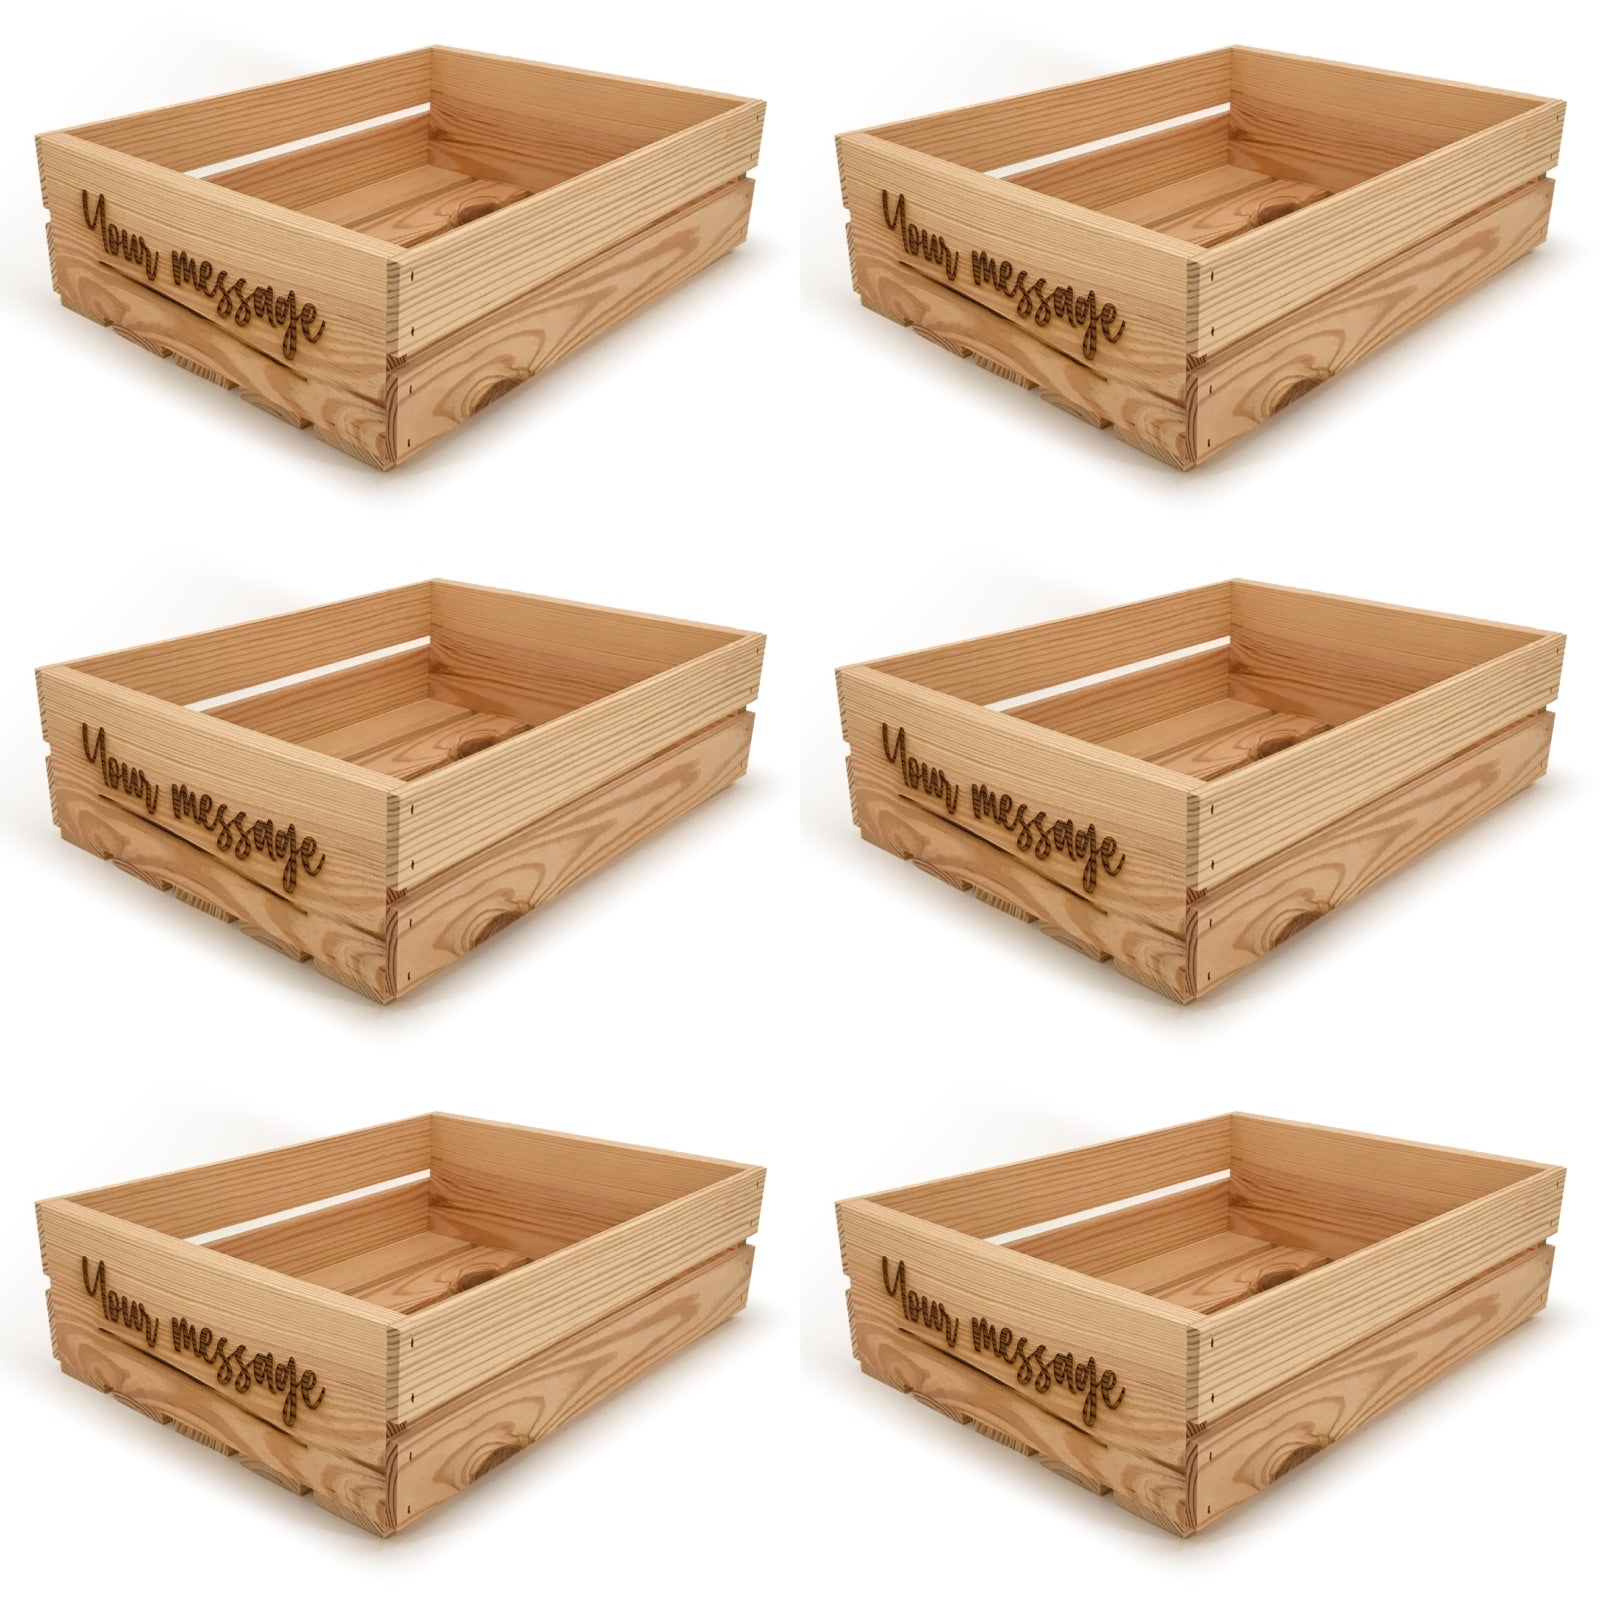 6 Small wooden crates with custom message 18x14x5.25